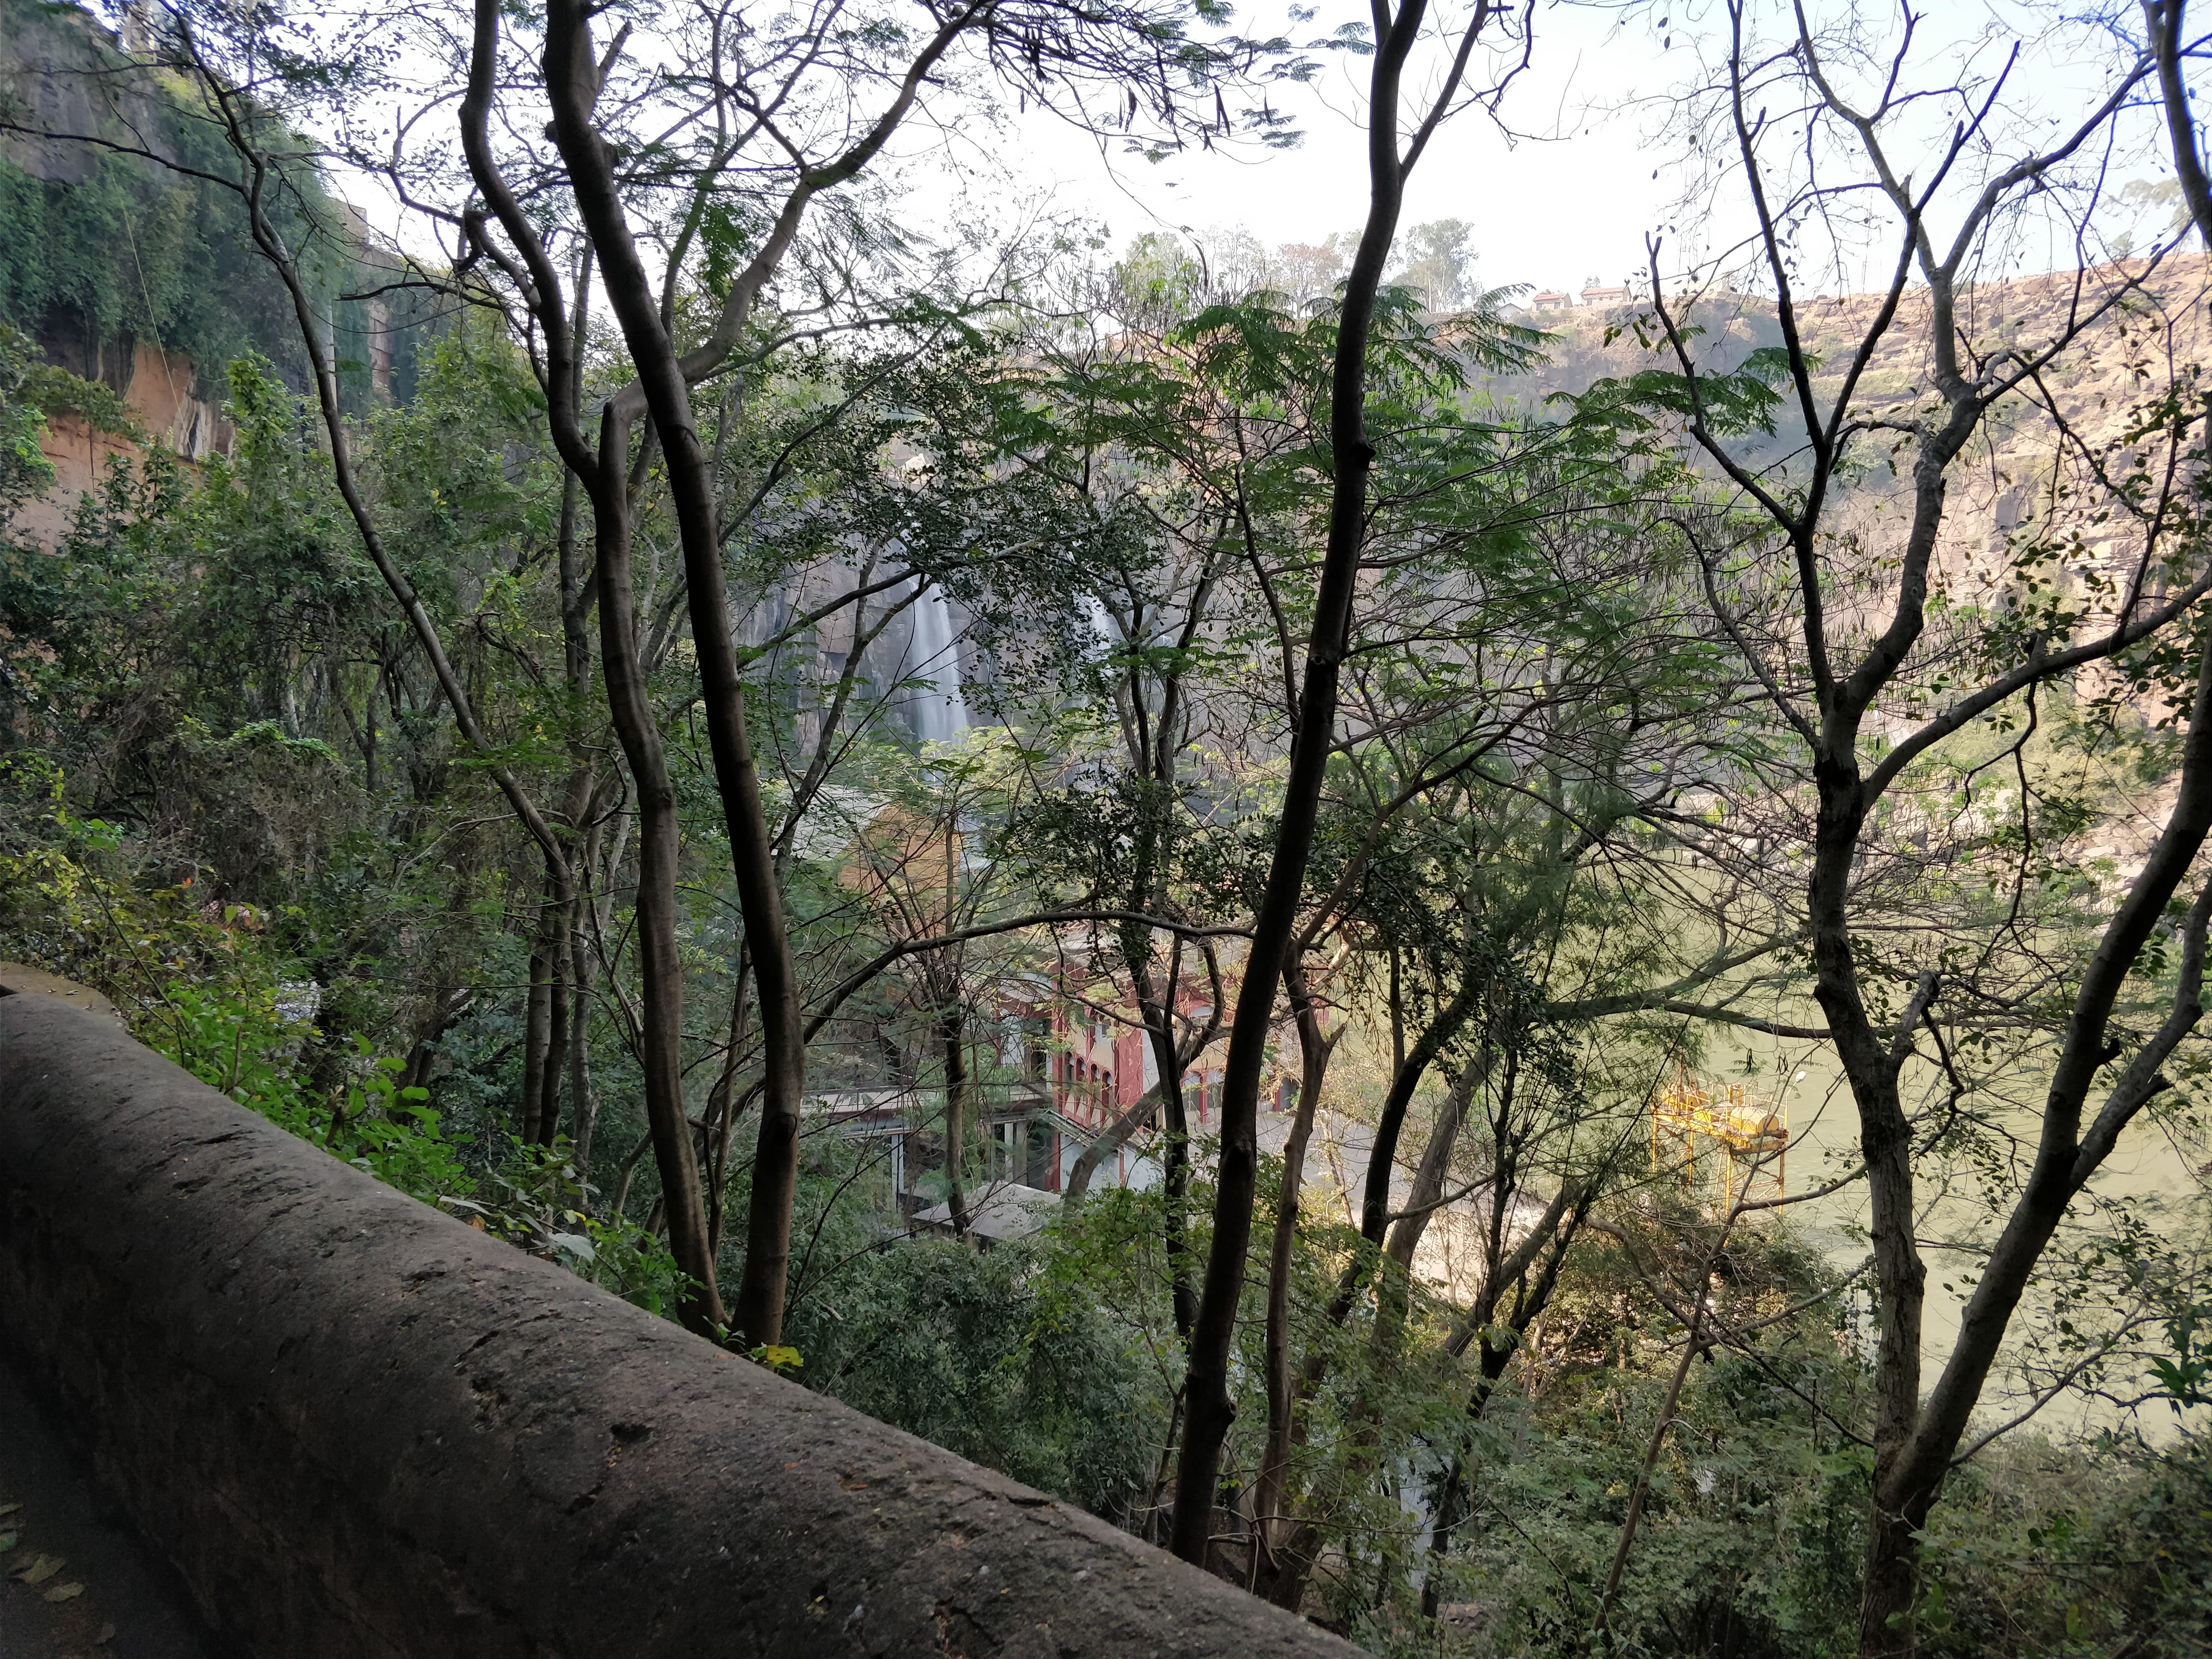 Gokak falls and power station through the trees